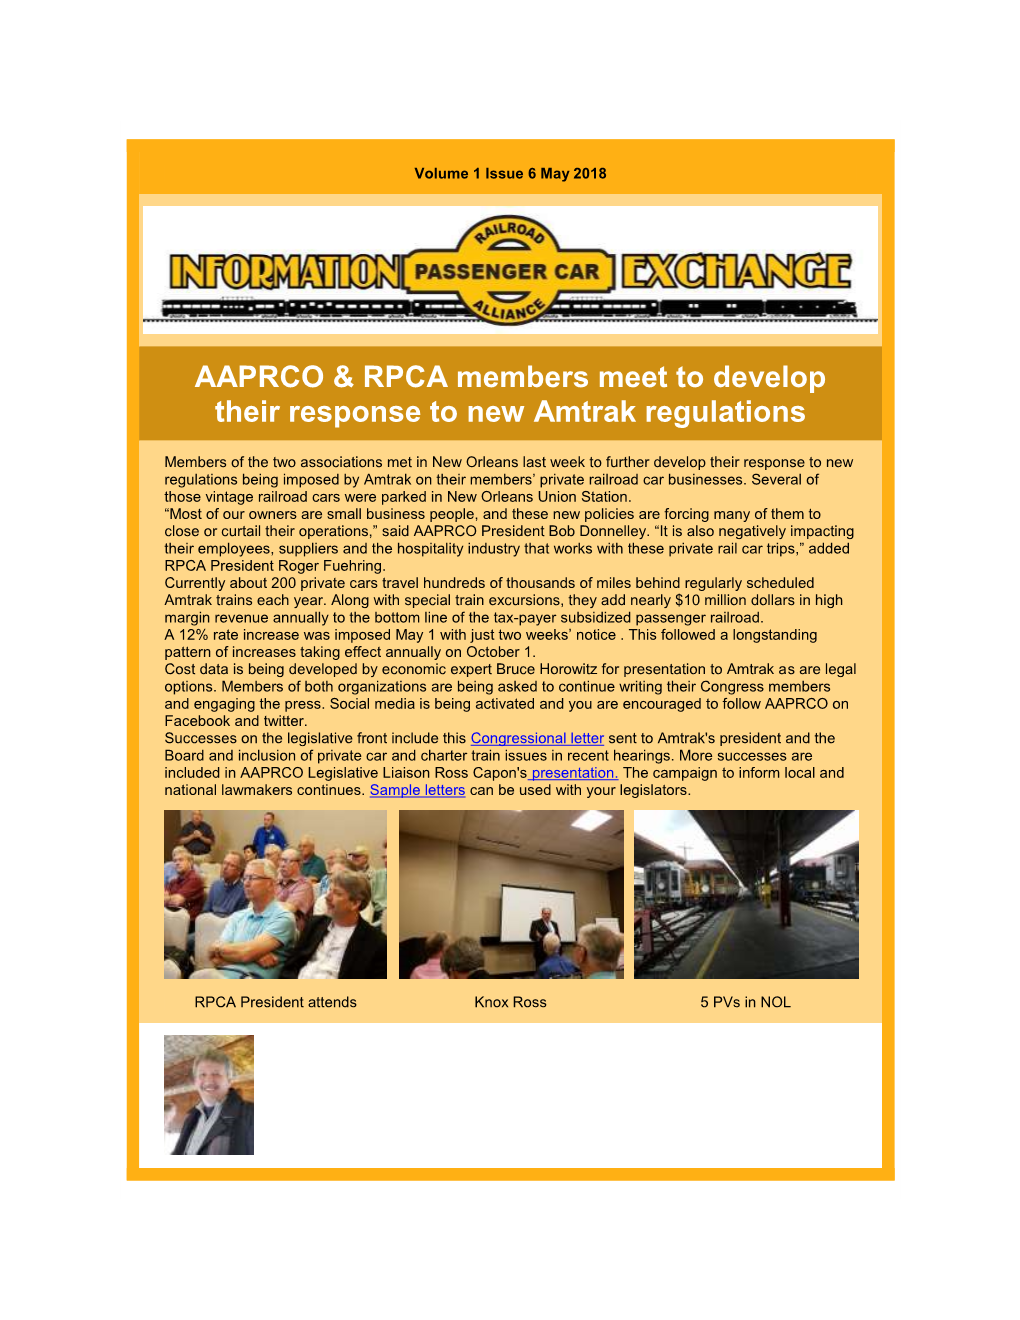 AAPRCO & RPCA Members Meet to Develop Their Response to New Amtrak Regulations